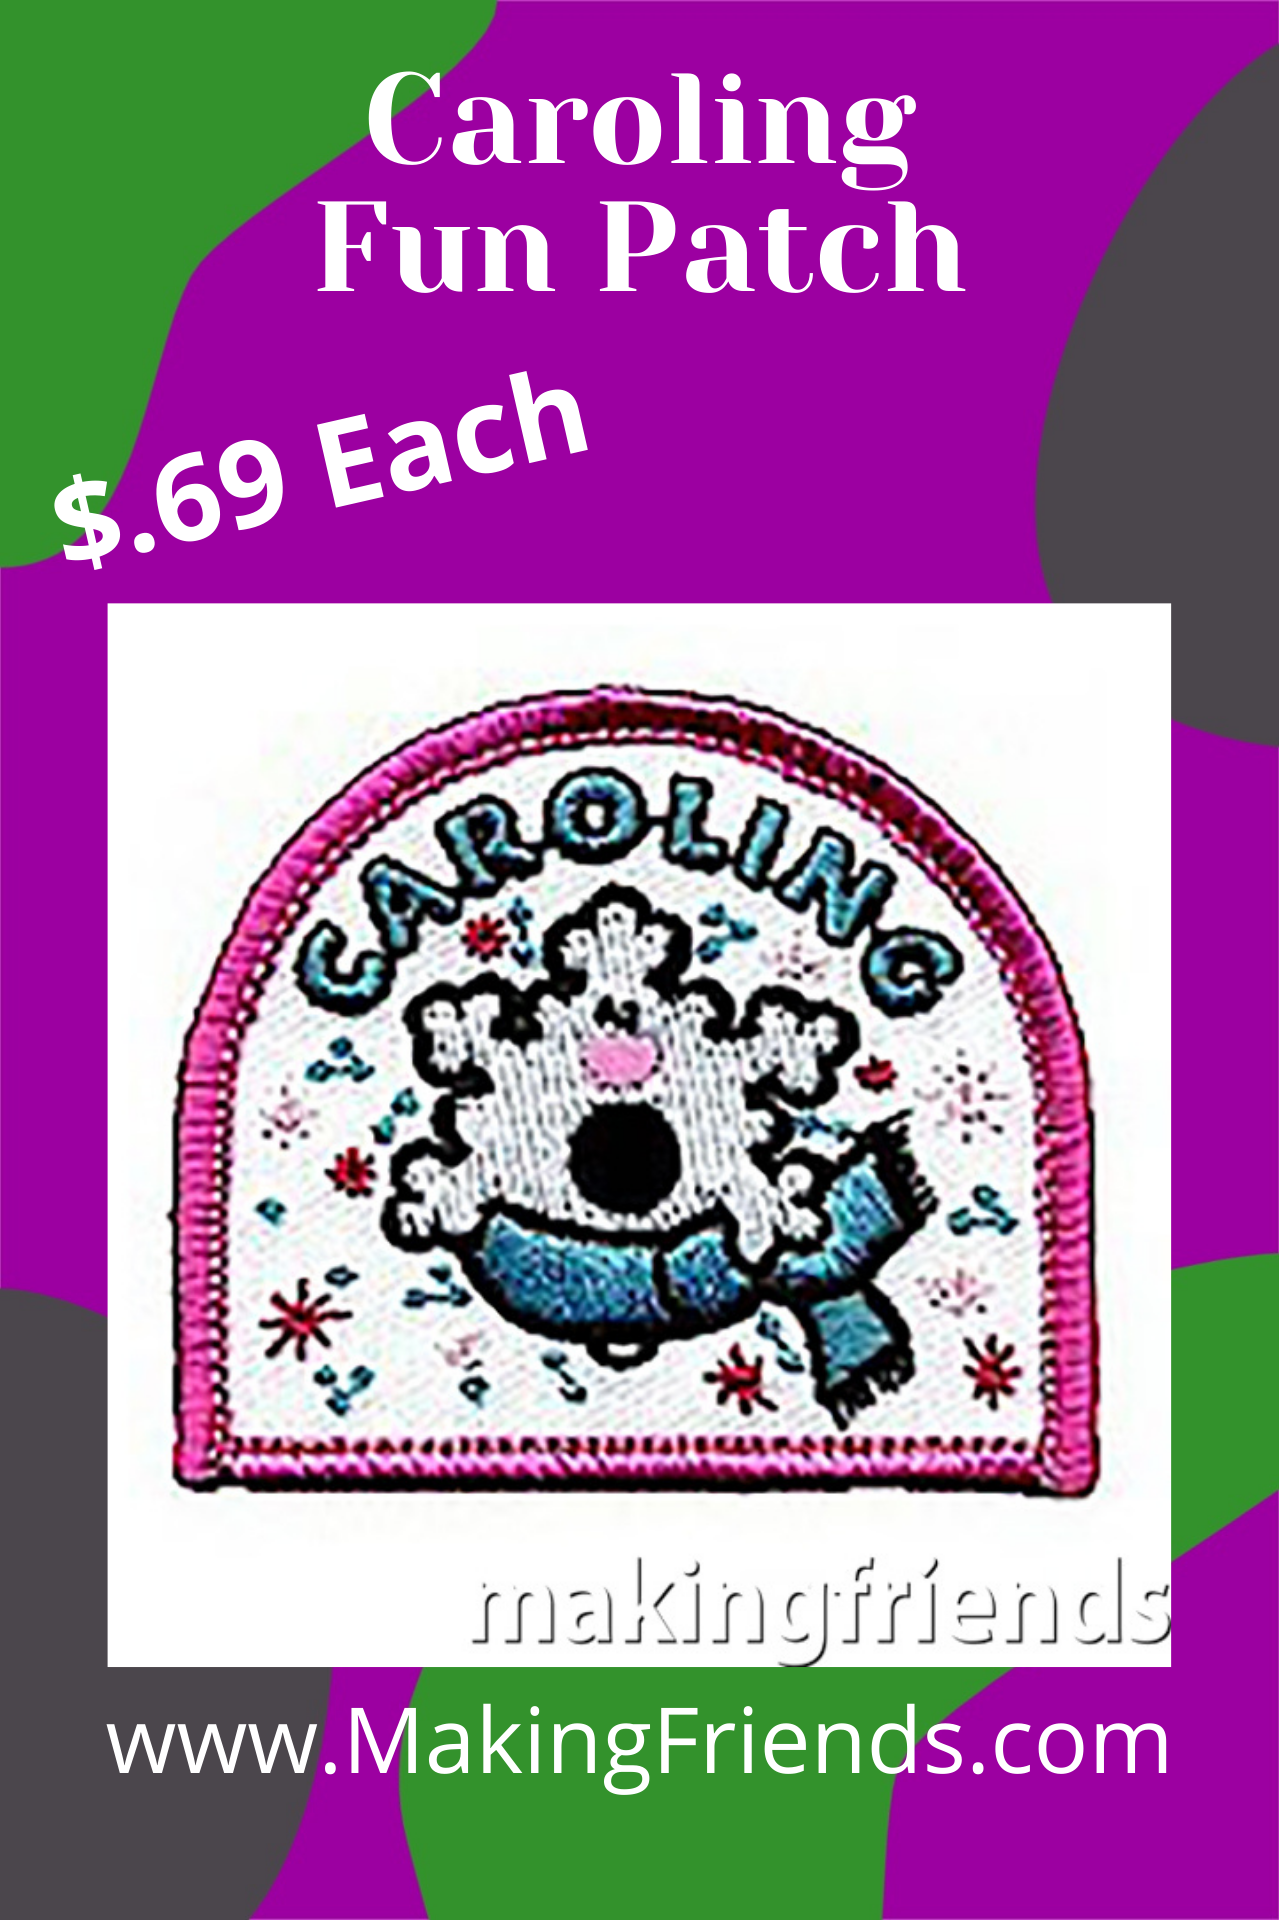 Our "Caroling" Patch strikes a note that you have helped spread holiday cheer. $.69 each free shipping available! #makingfriends #caroling #carolingpatch #funpatch #girlscouts #gsfunpatch #holidays #spreadcheer #holidaycheer #singing via @gsleader411